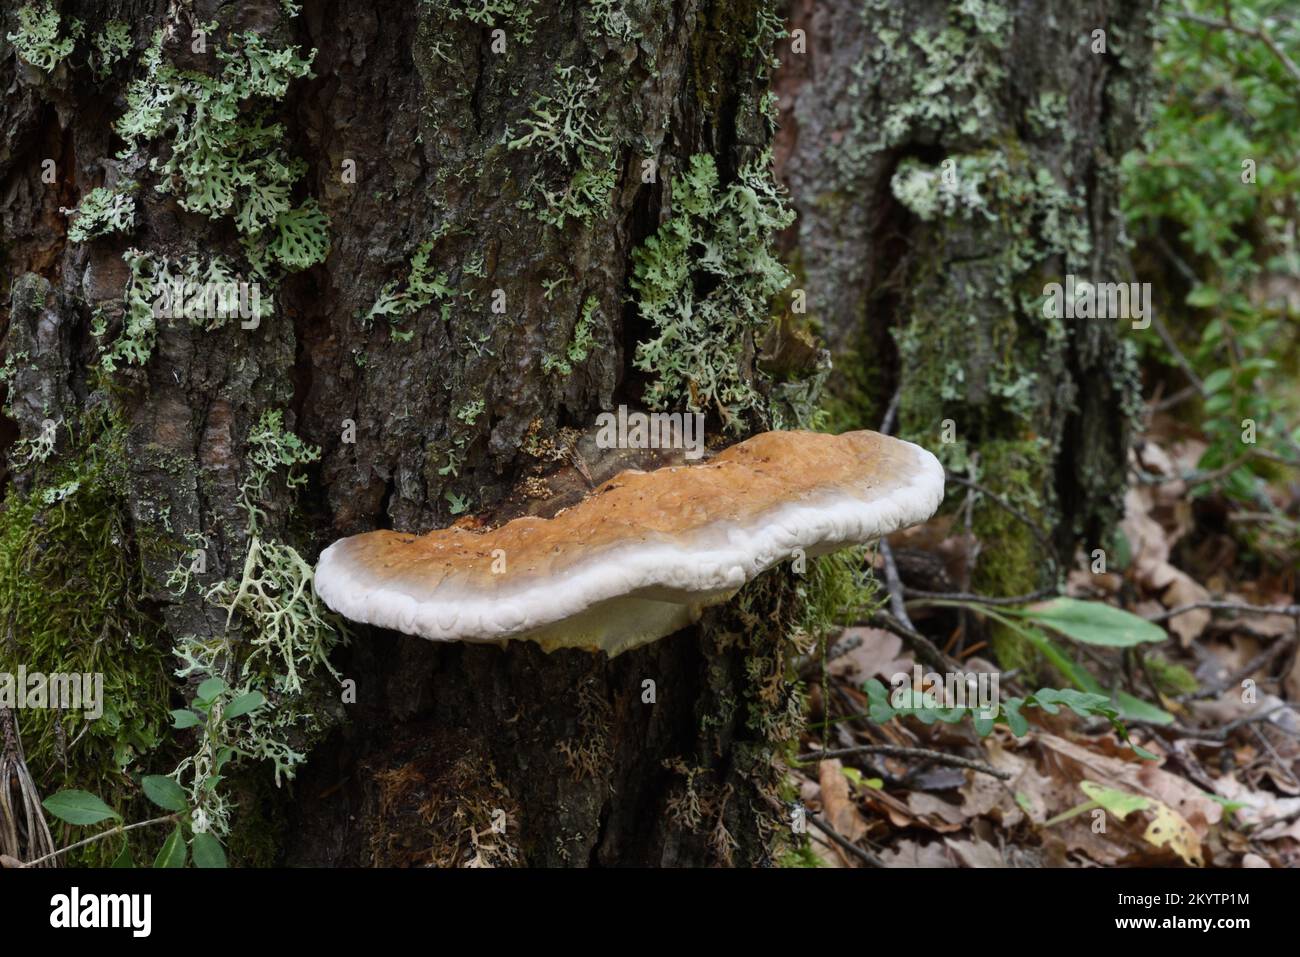 Young Red-Belted Conk or Stem Decay Fungus Fomitopsis pinicola Shelf Fungus or Bracket Fungus or Mushroom Stock Photo